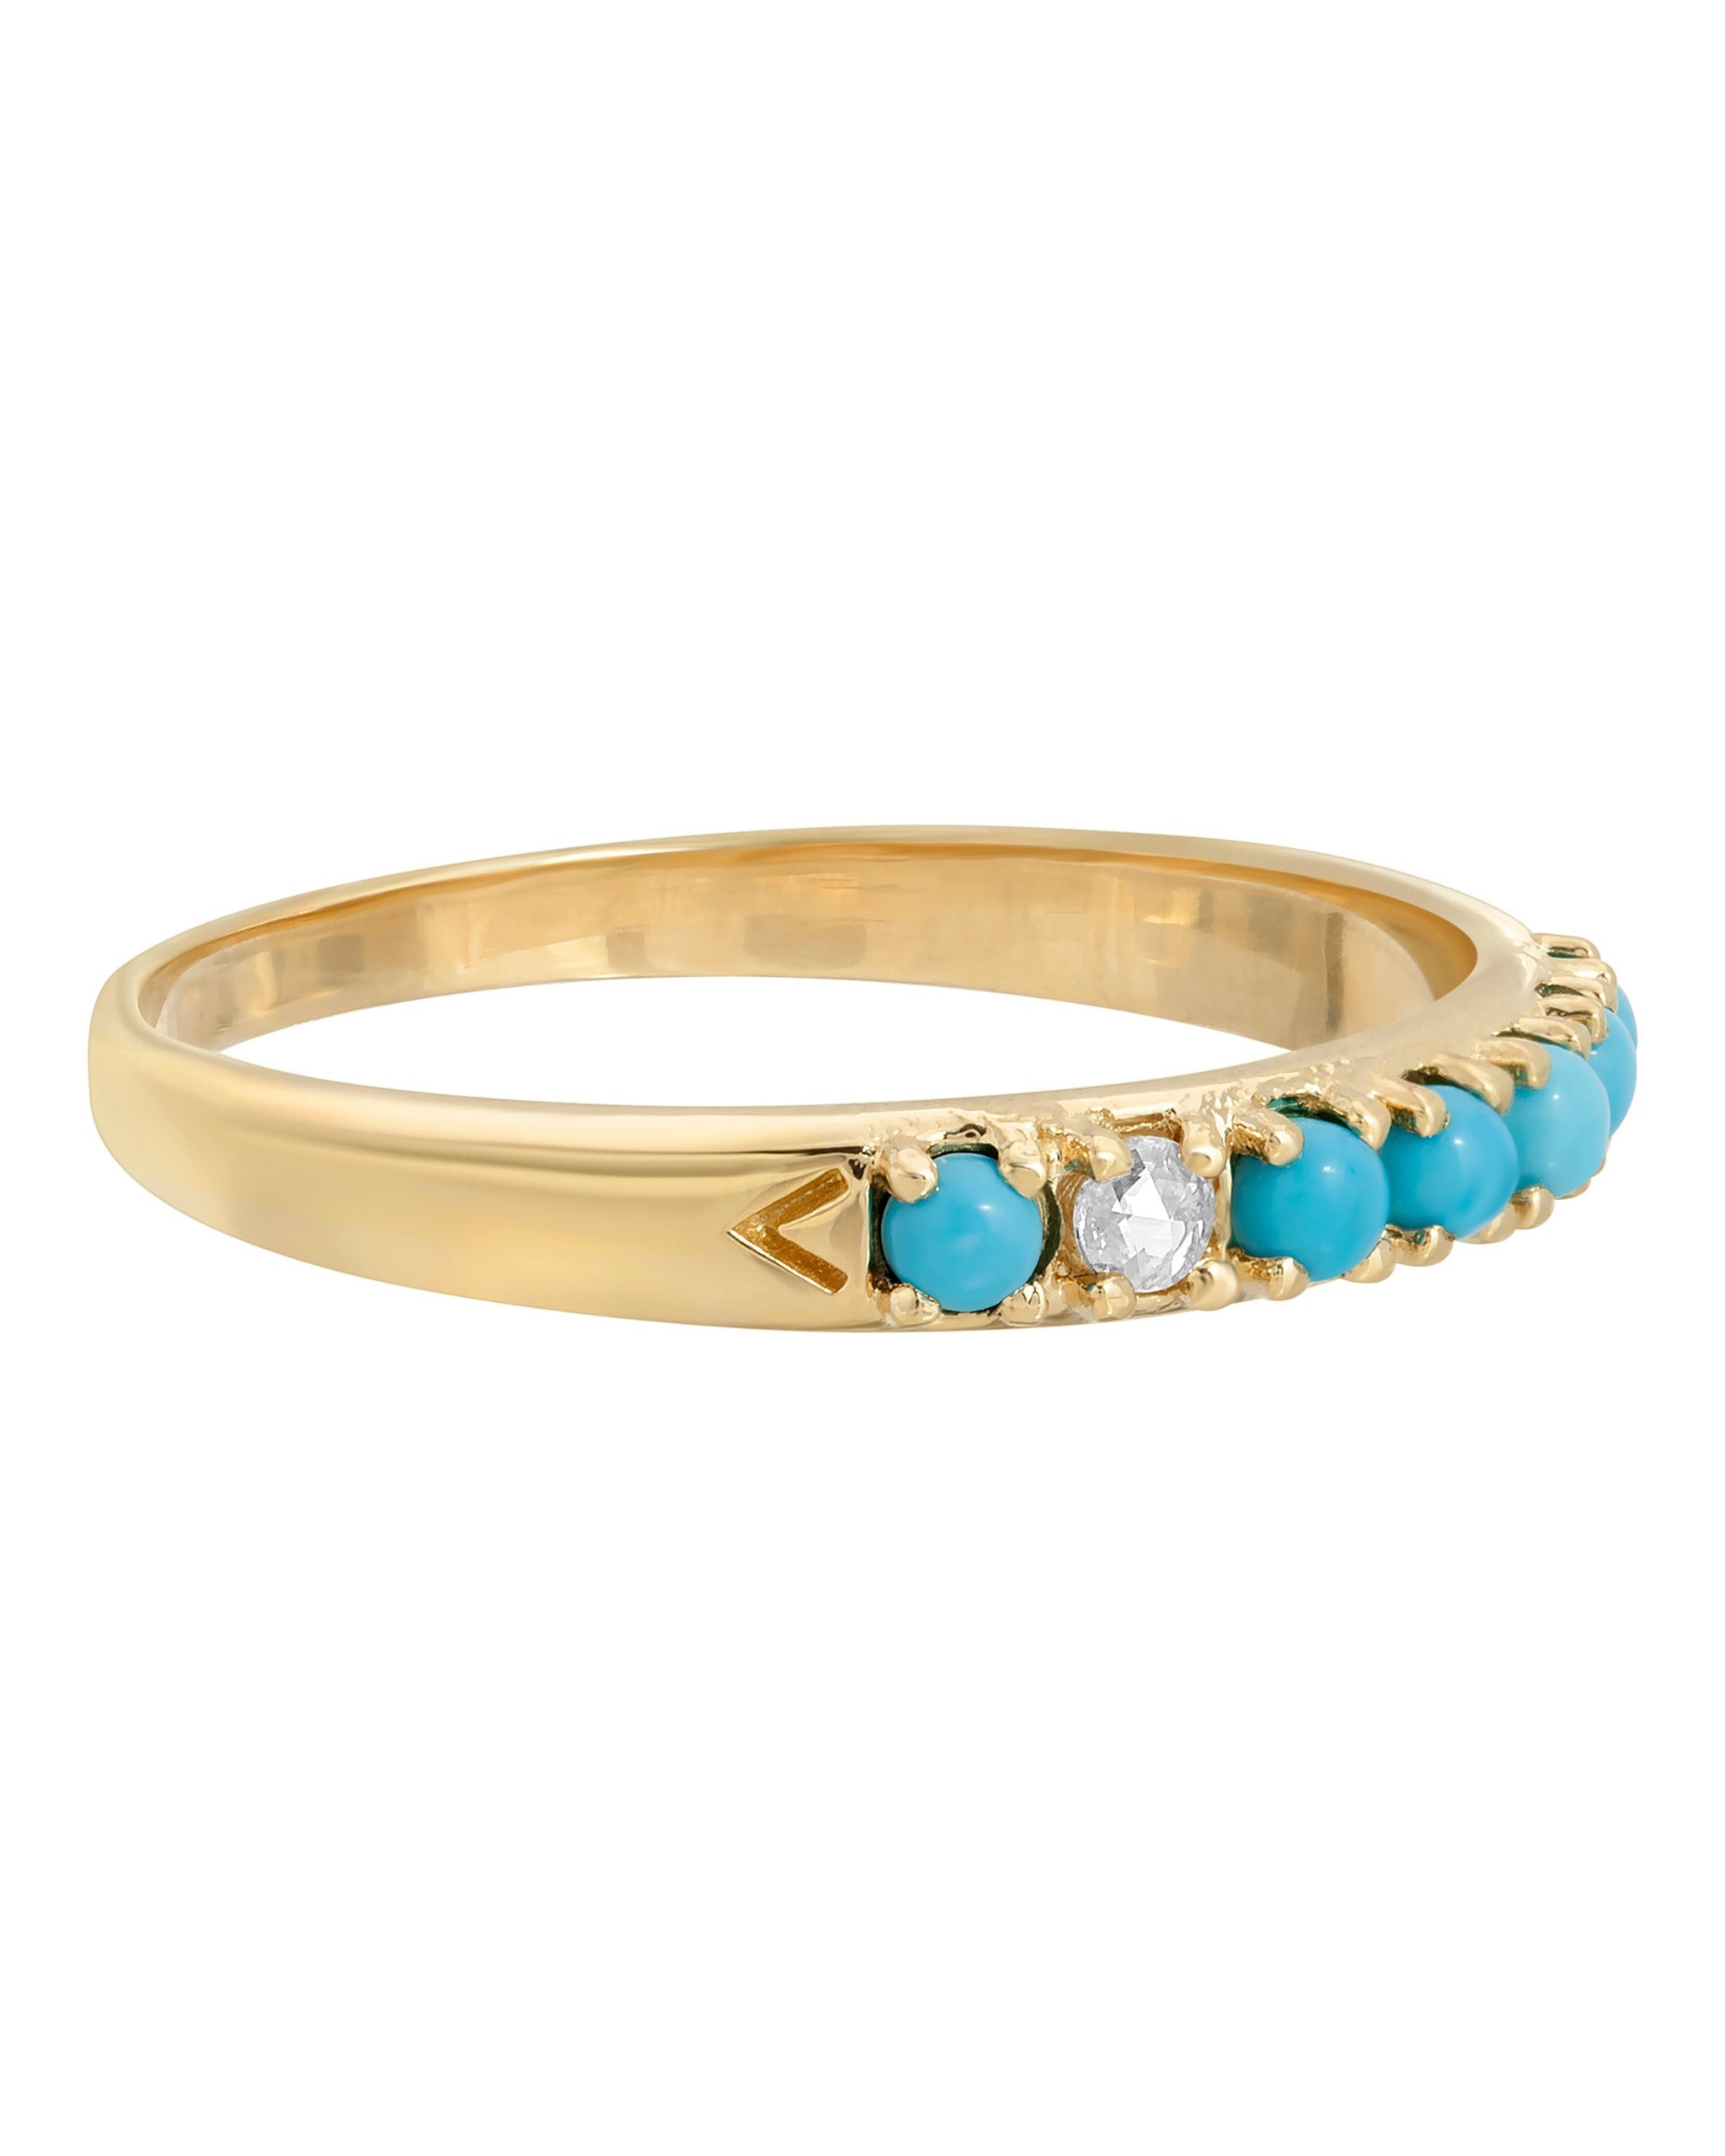 Wylde Ring, 14k yellow gold seven stone band with six sleeping beauty stones and one white diamond, handmade by Turquoise + Tobacco 